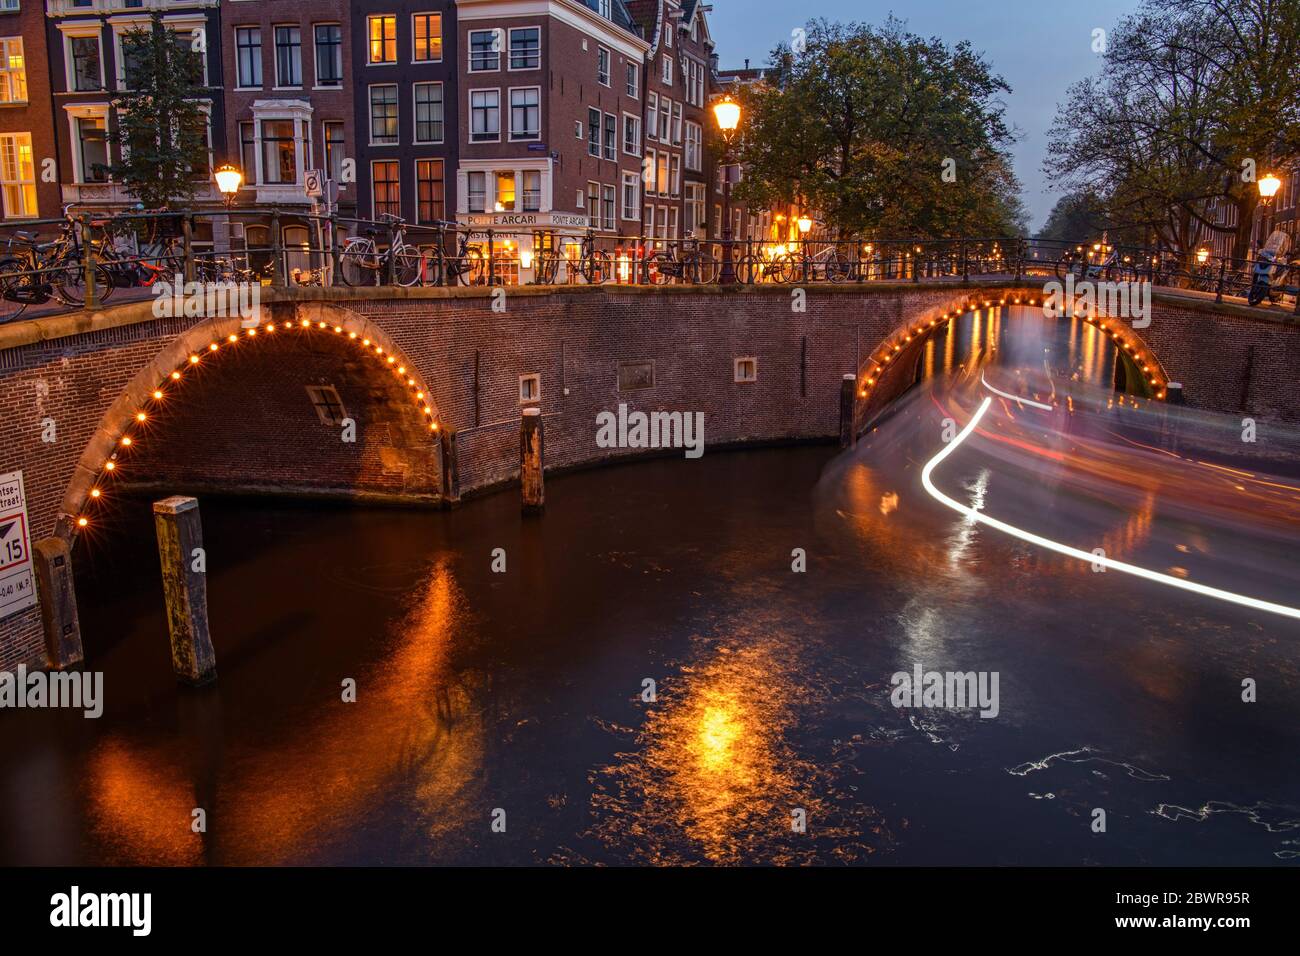 Reflections of bridge lighting in canals at dusk, Amsterdam, North Holland, Netherlands. Stock Photo